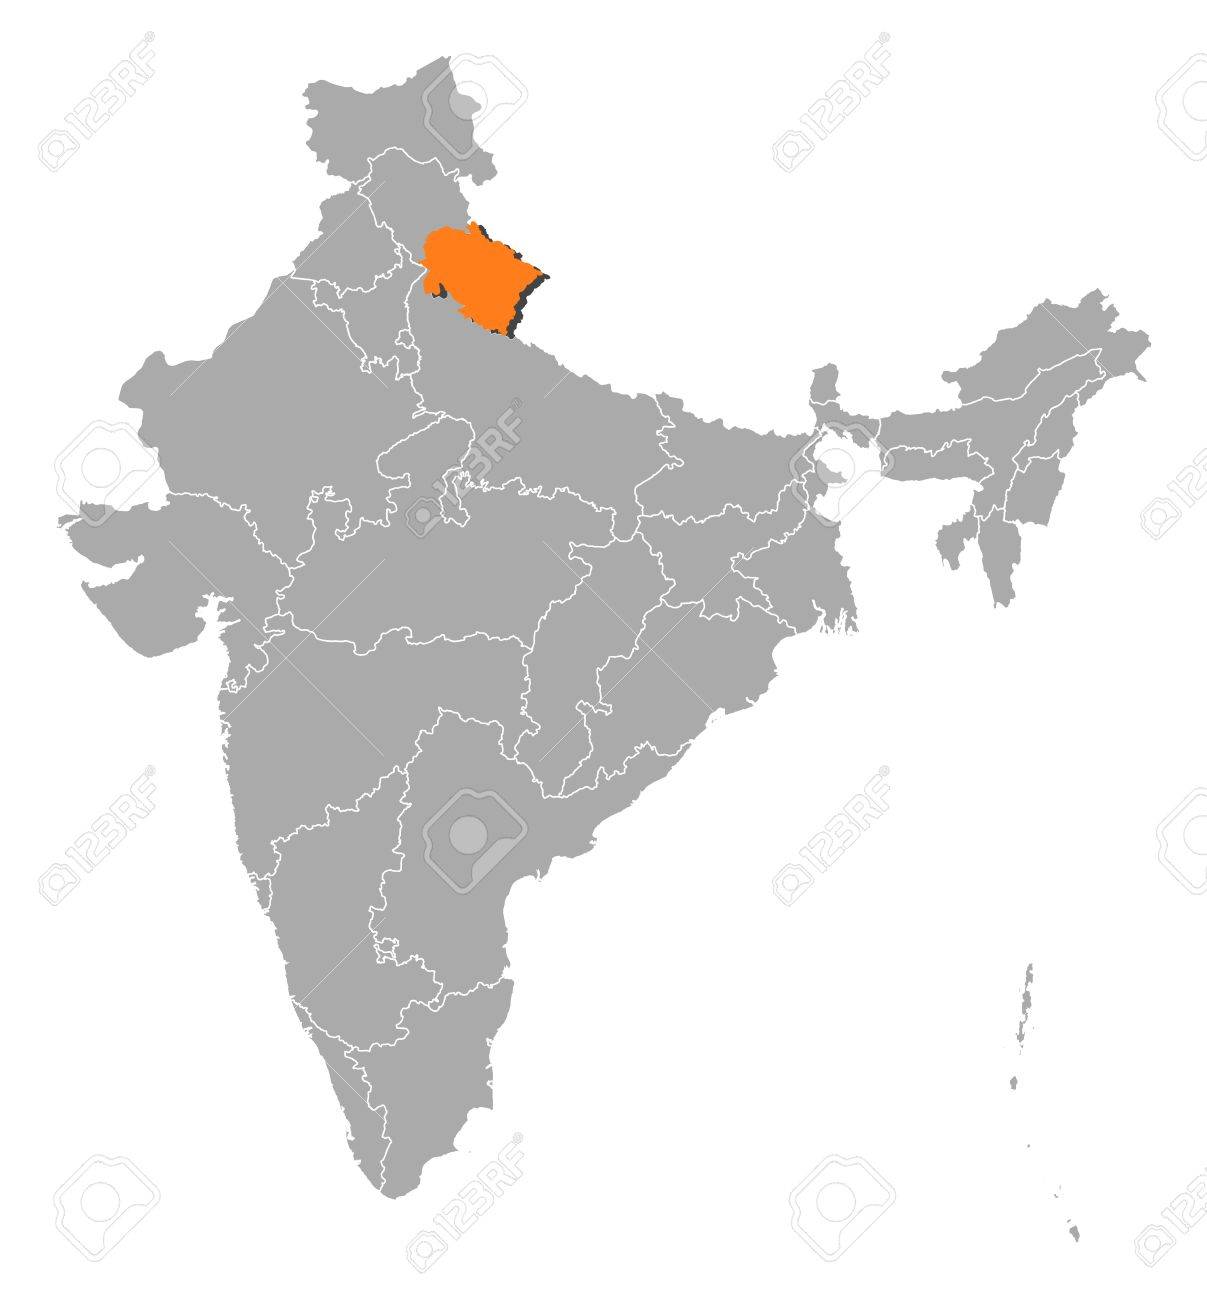 11451694-political-map-of-india-with-the-several-states-where-uttarakhand-is-highlighted-.jpg